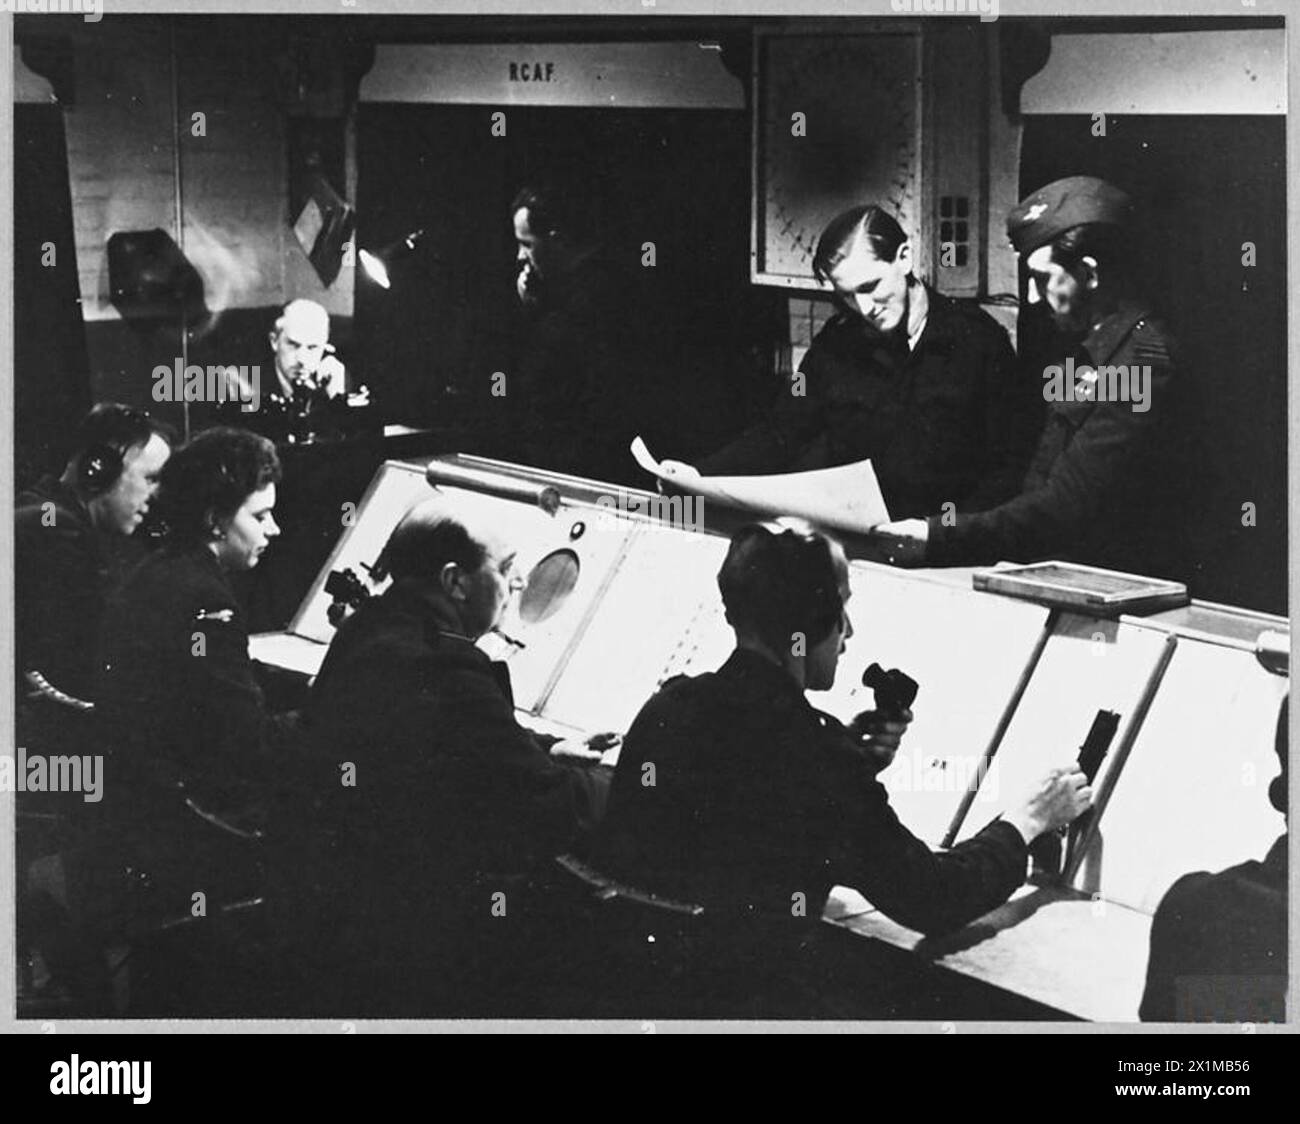 LANCASTER 'N' FOR NUTS BOMBS PARIS RAILWAY YARDS - 12868 Picture (issued 1944) shows - The control room during the operation, Royal Air Force Stock Photo